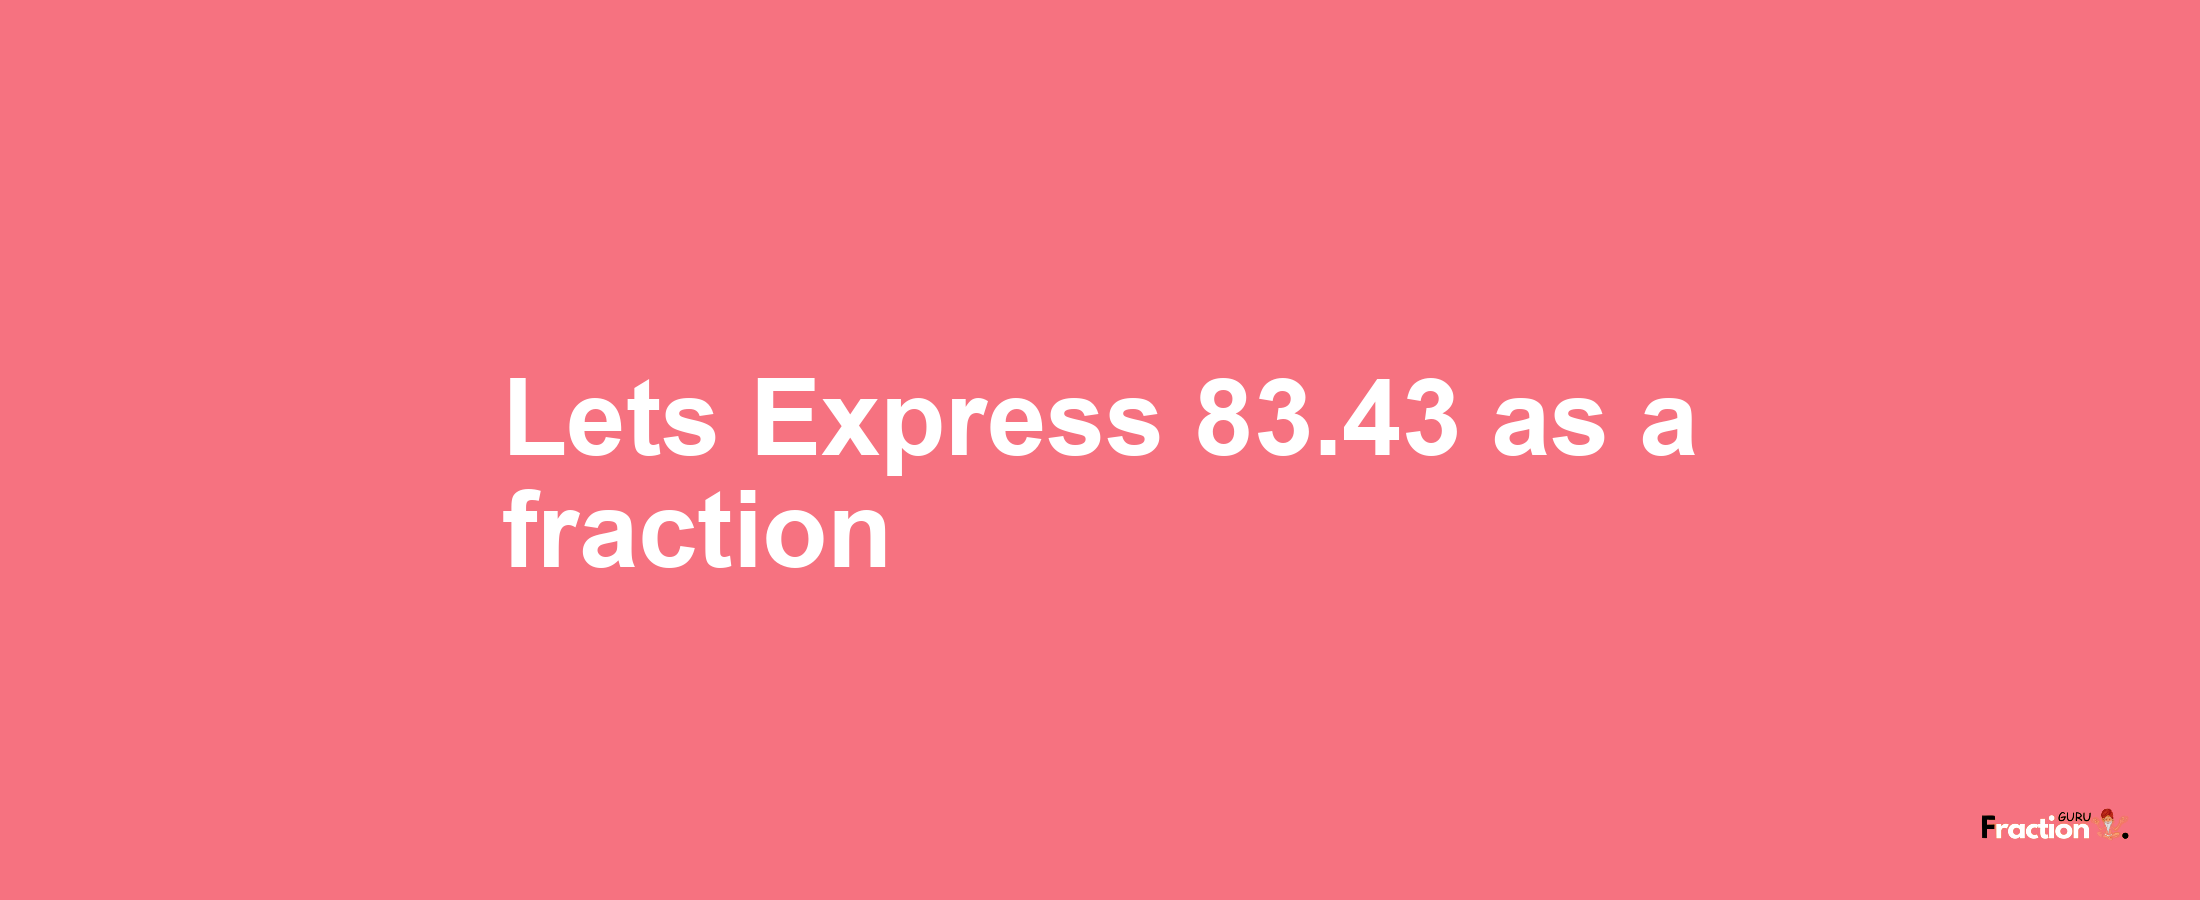 Lets Express 83.43 as afraction